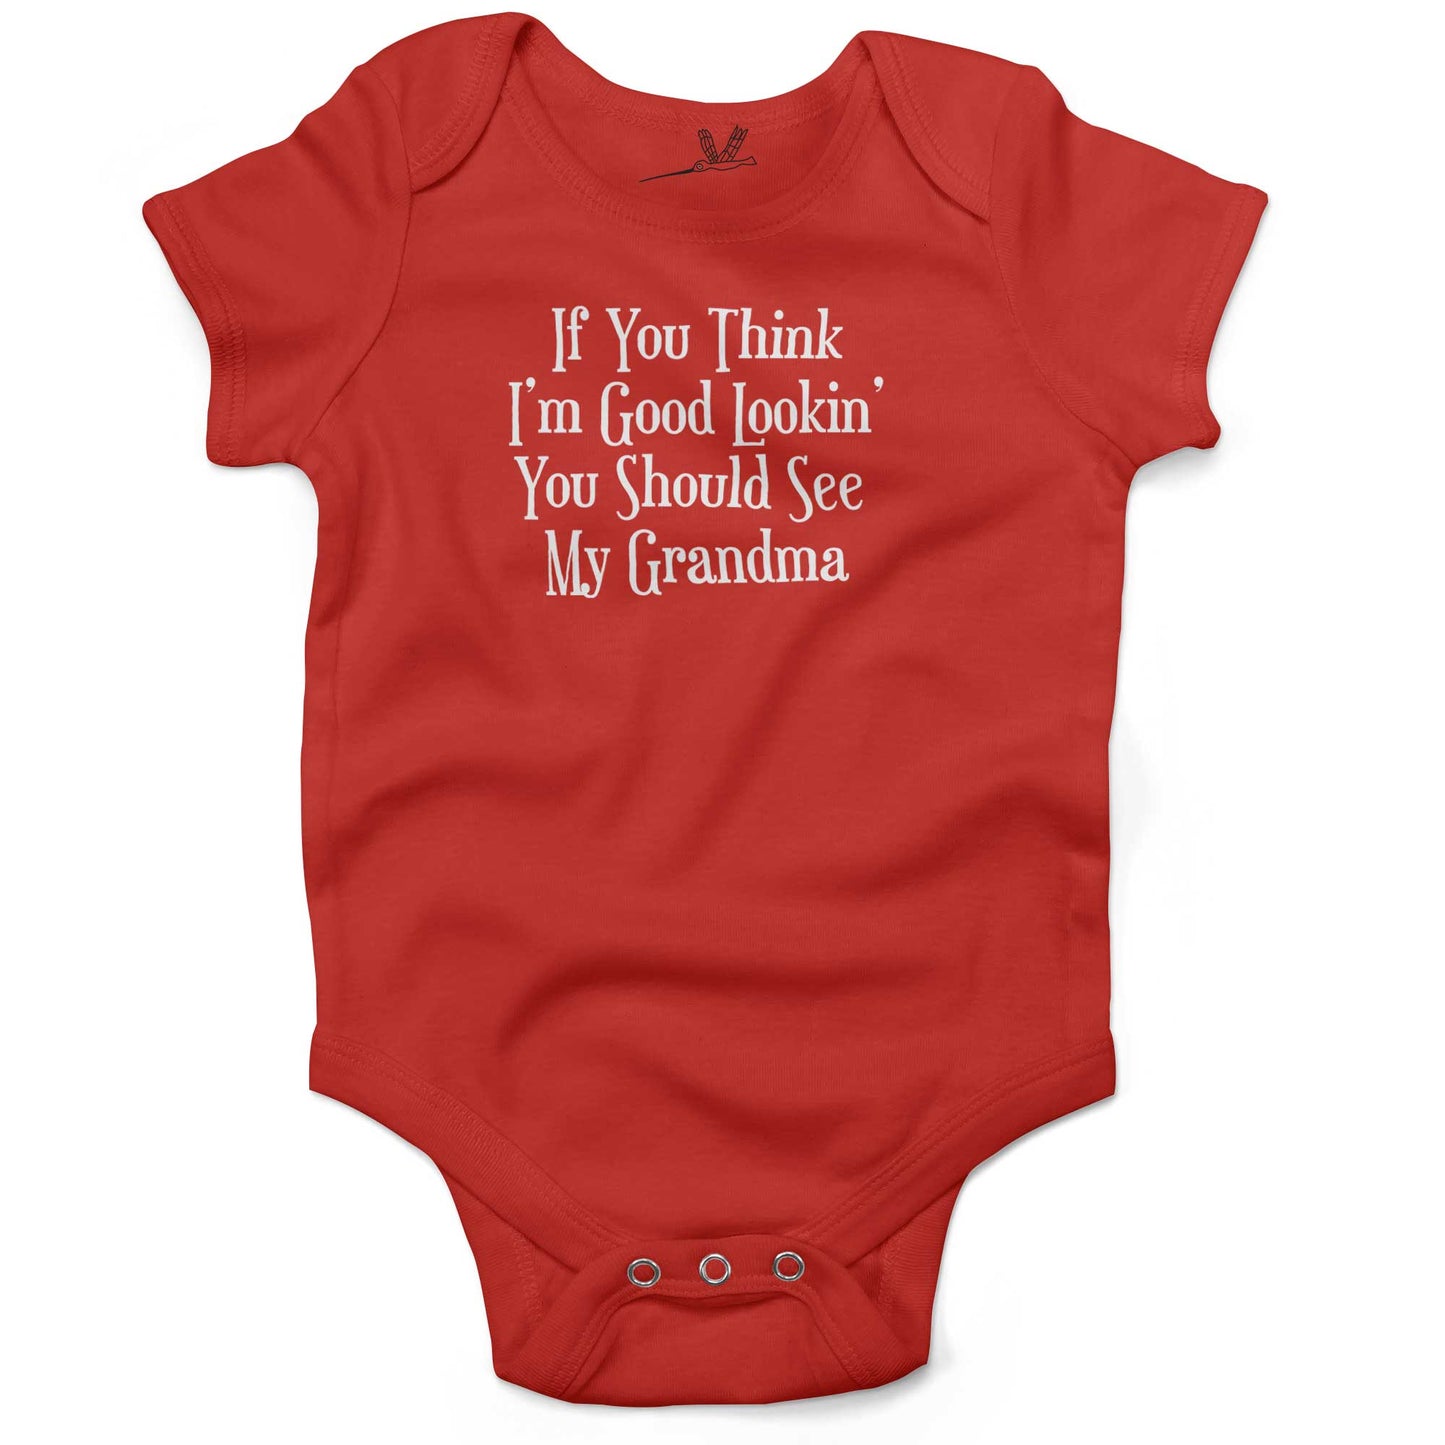 If You Think I'm Good Lookin', You Should See My Grandma Infant Bodysuit or Raglan Tee-Organic Red-3-6 months